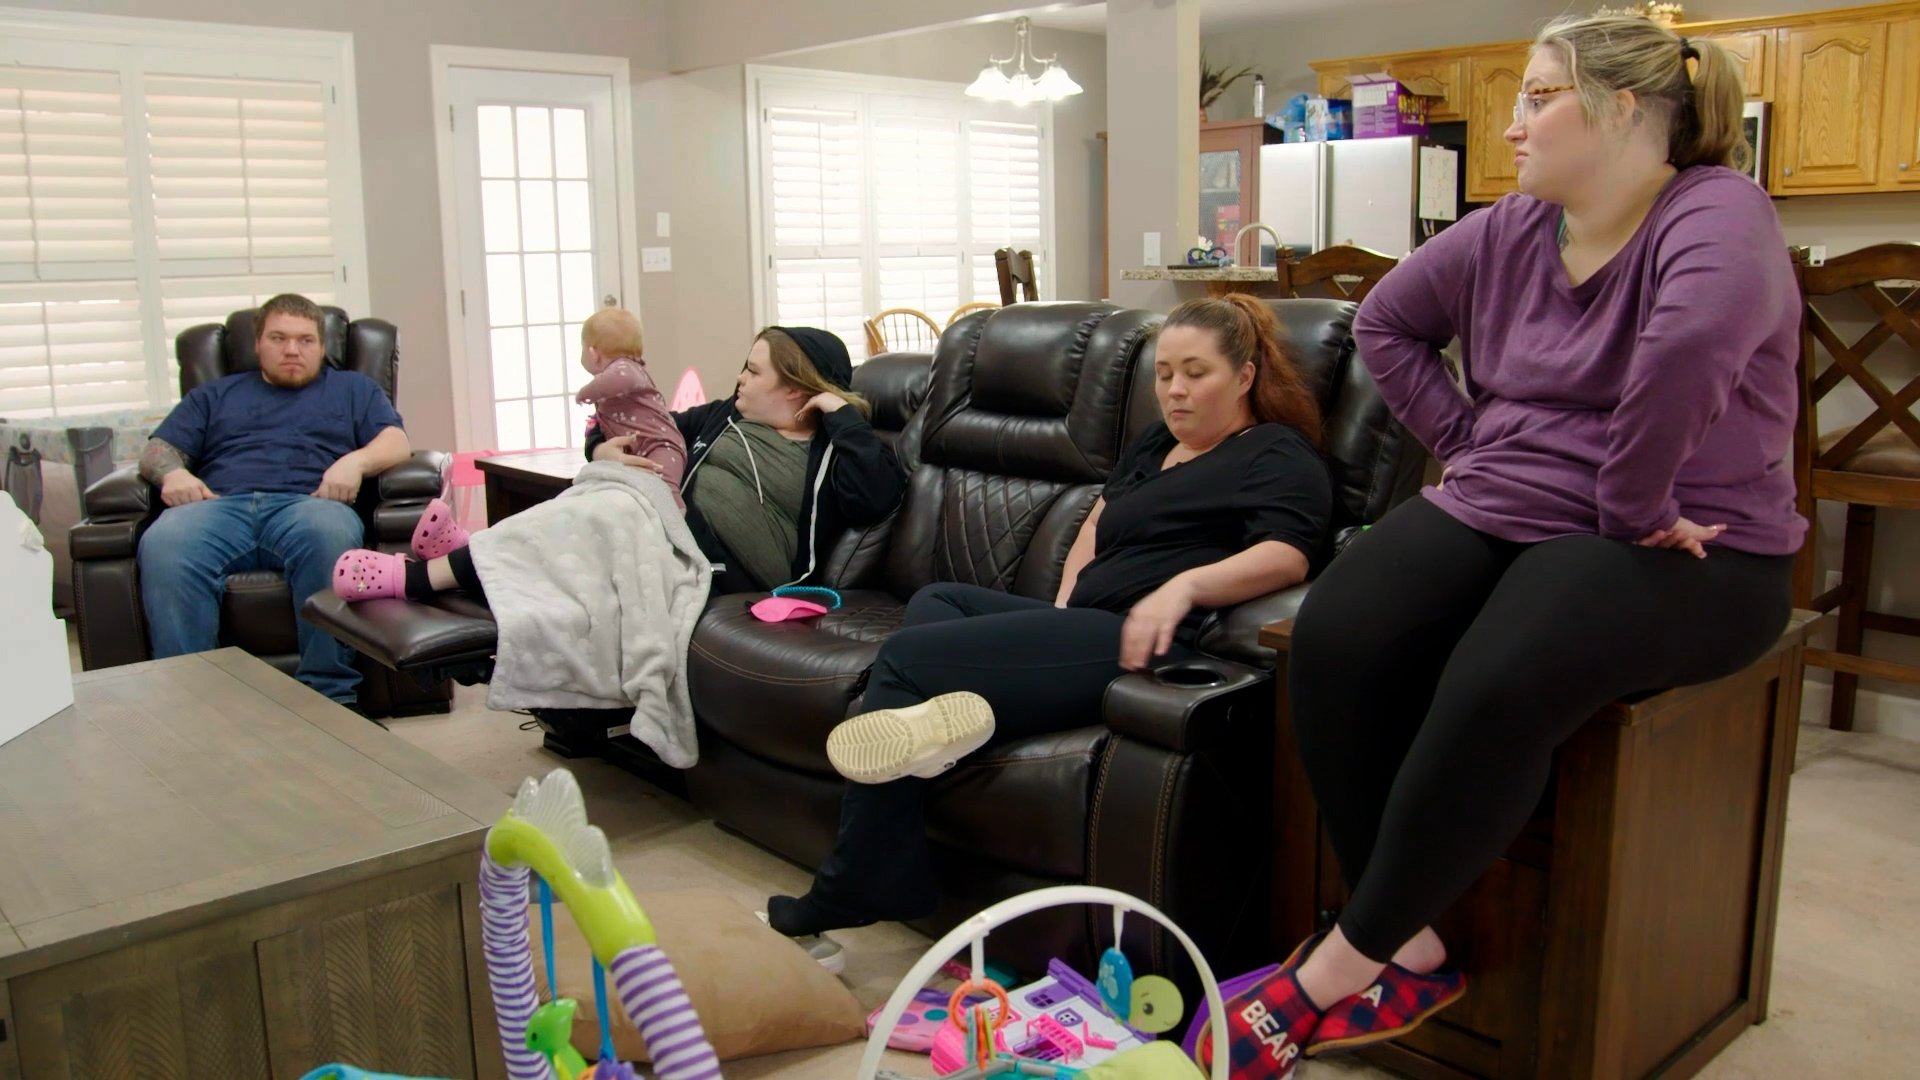 Watch Pumpkin Calls a Family Meeting | Mama June: From Not to Hot Video Extras